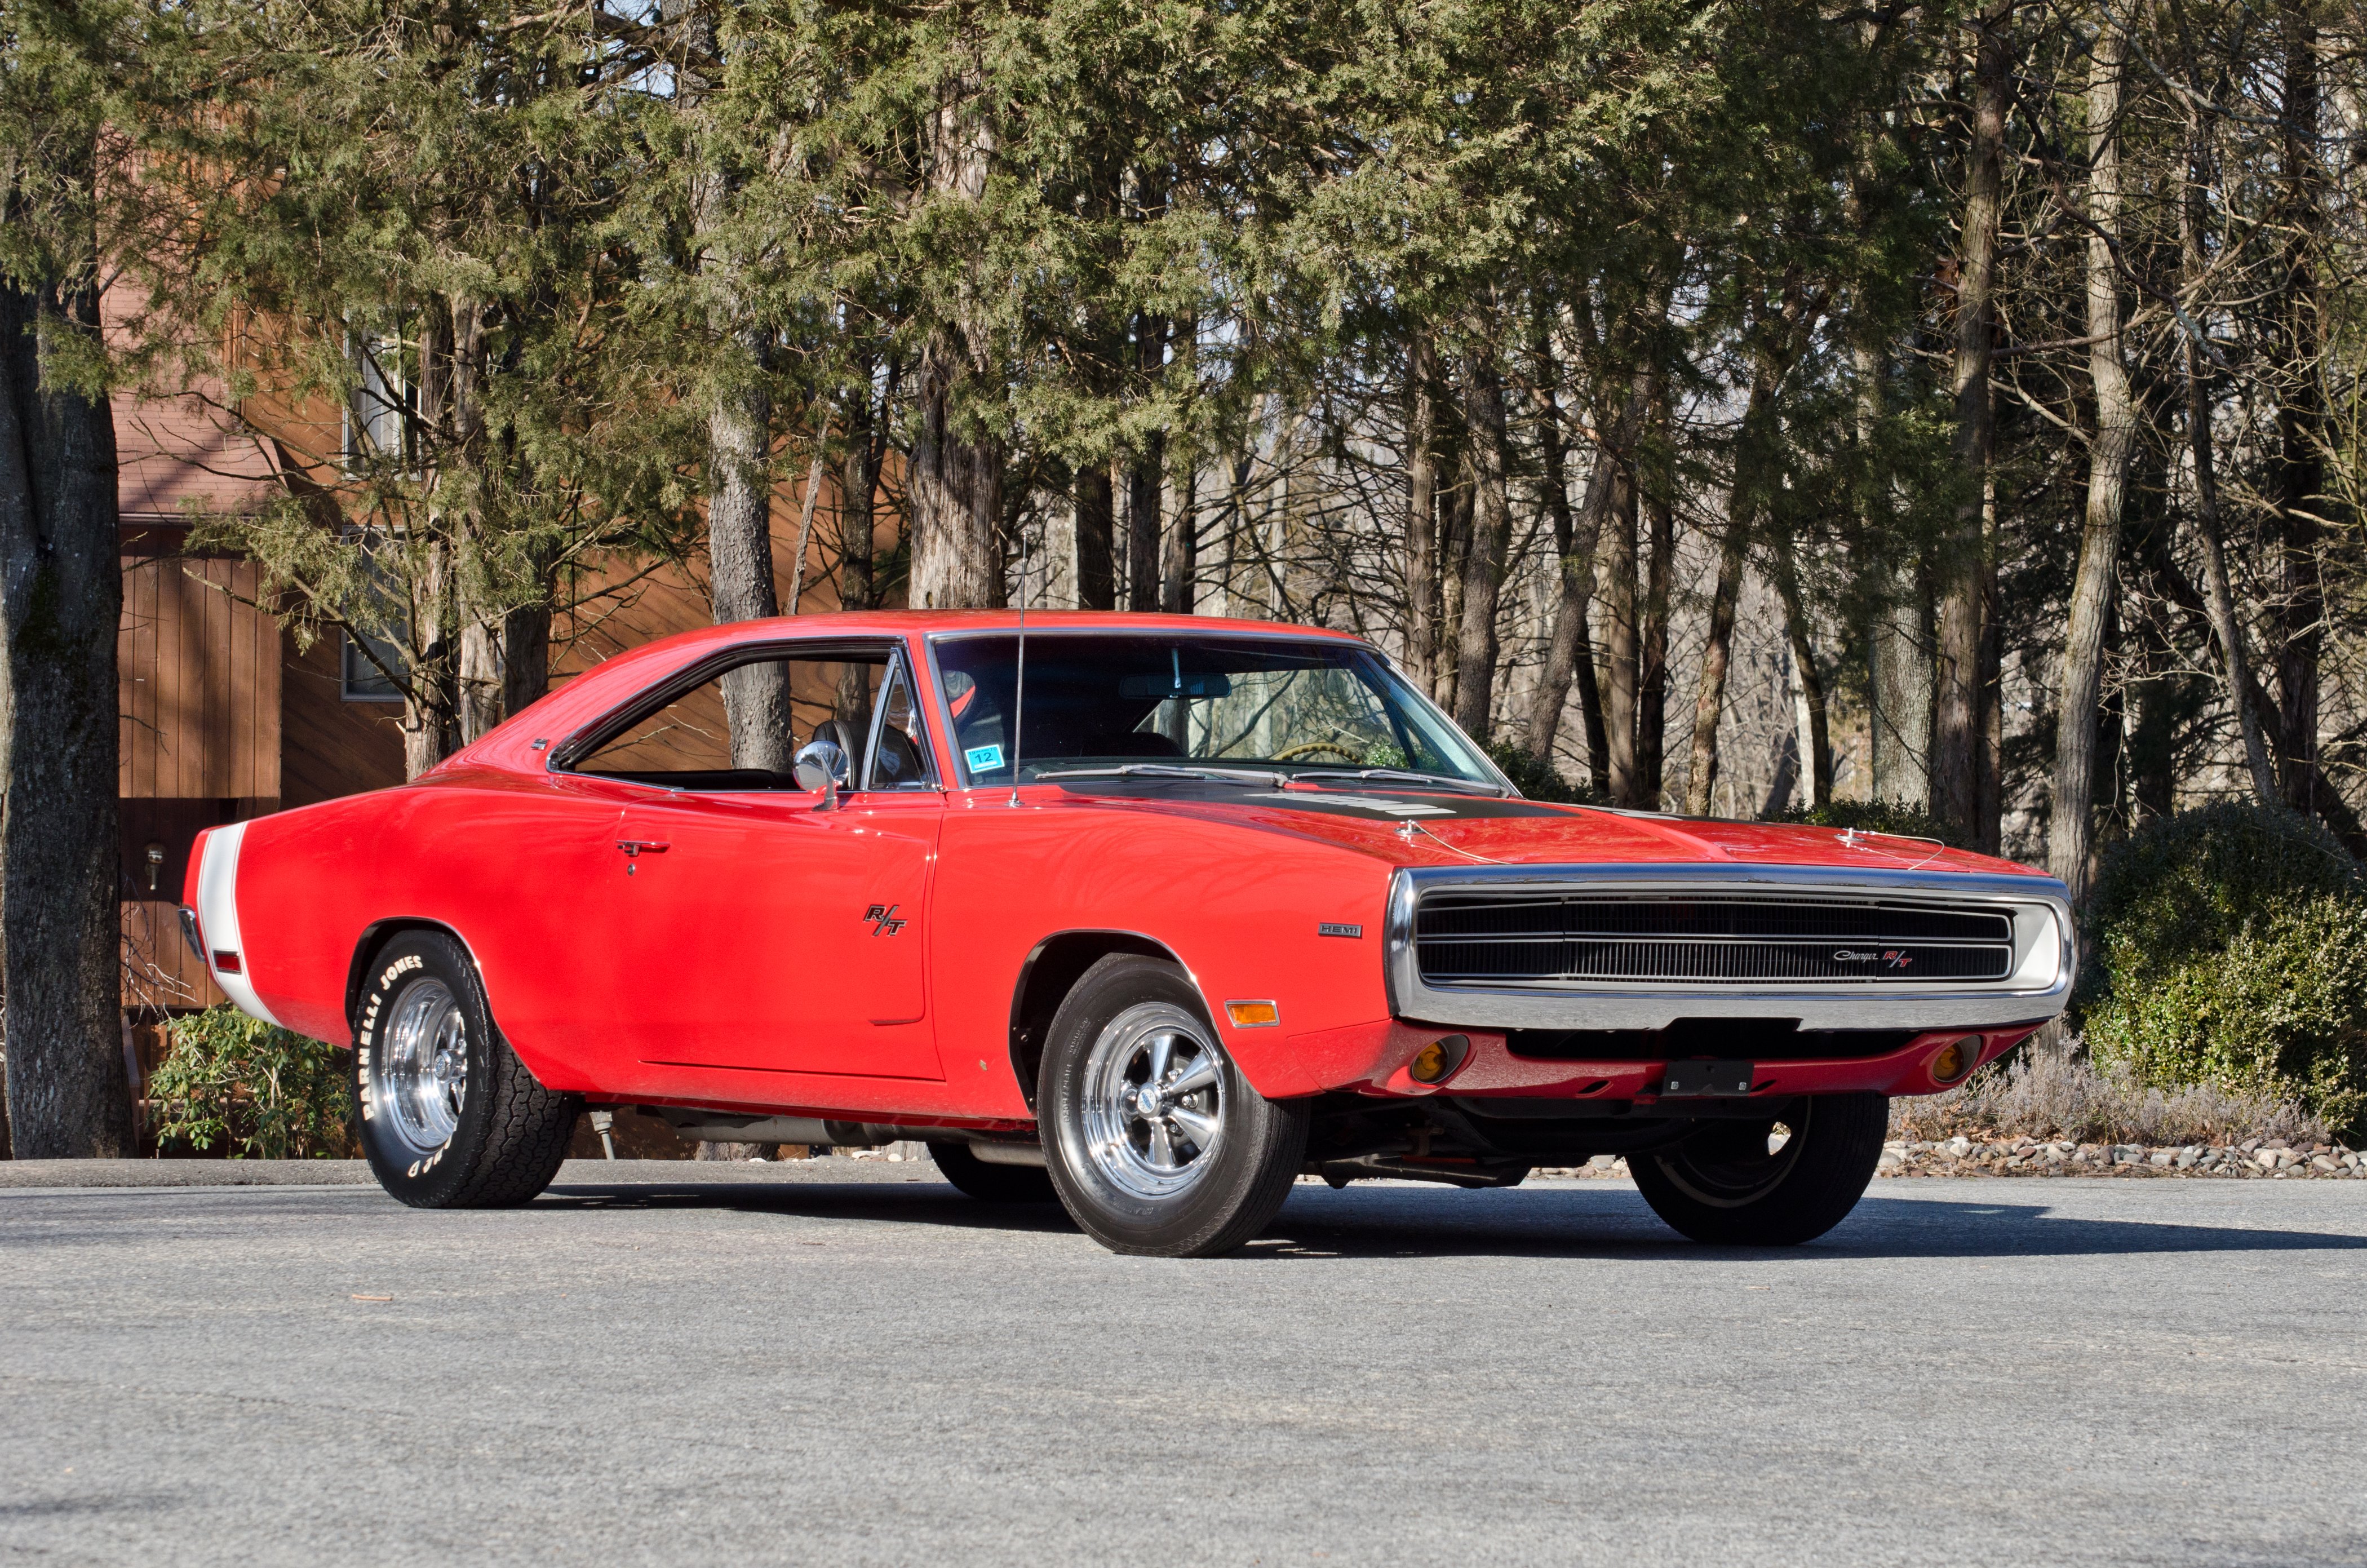 Dodge charger rt 0 to 60